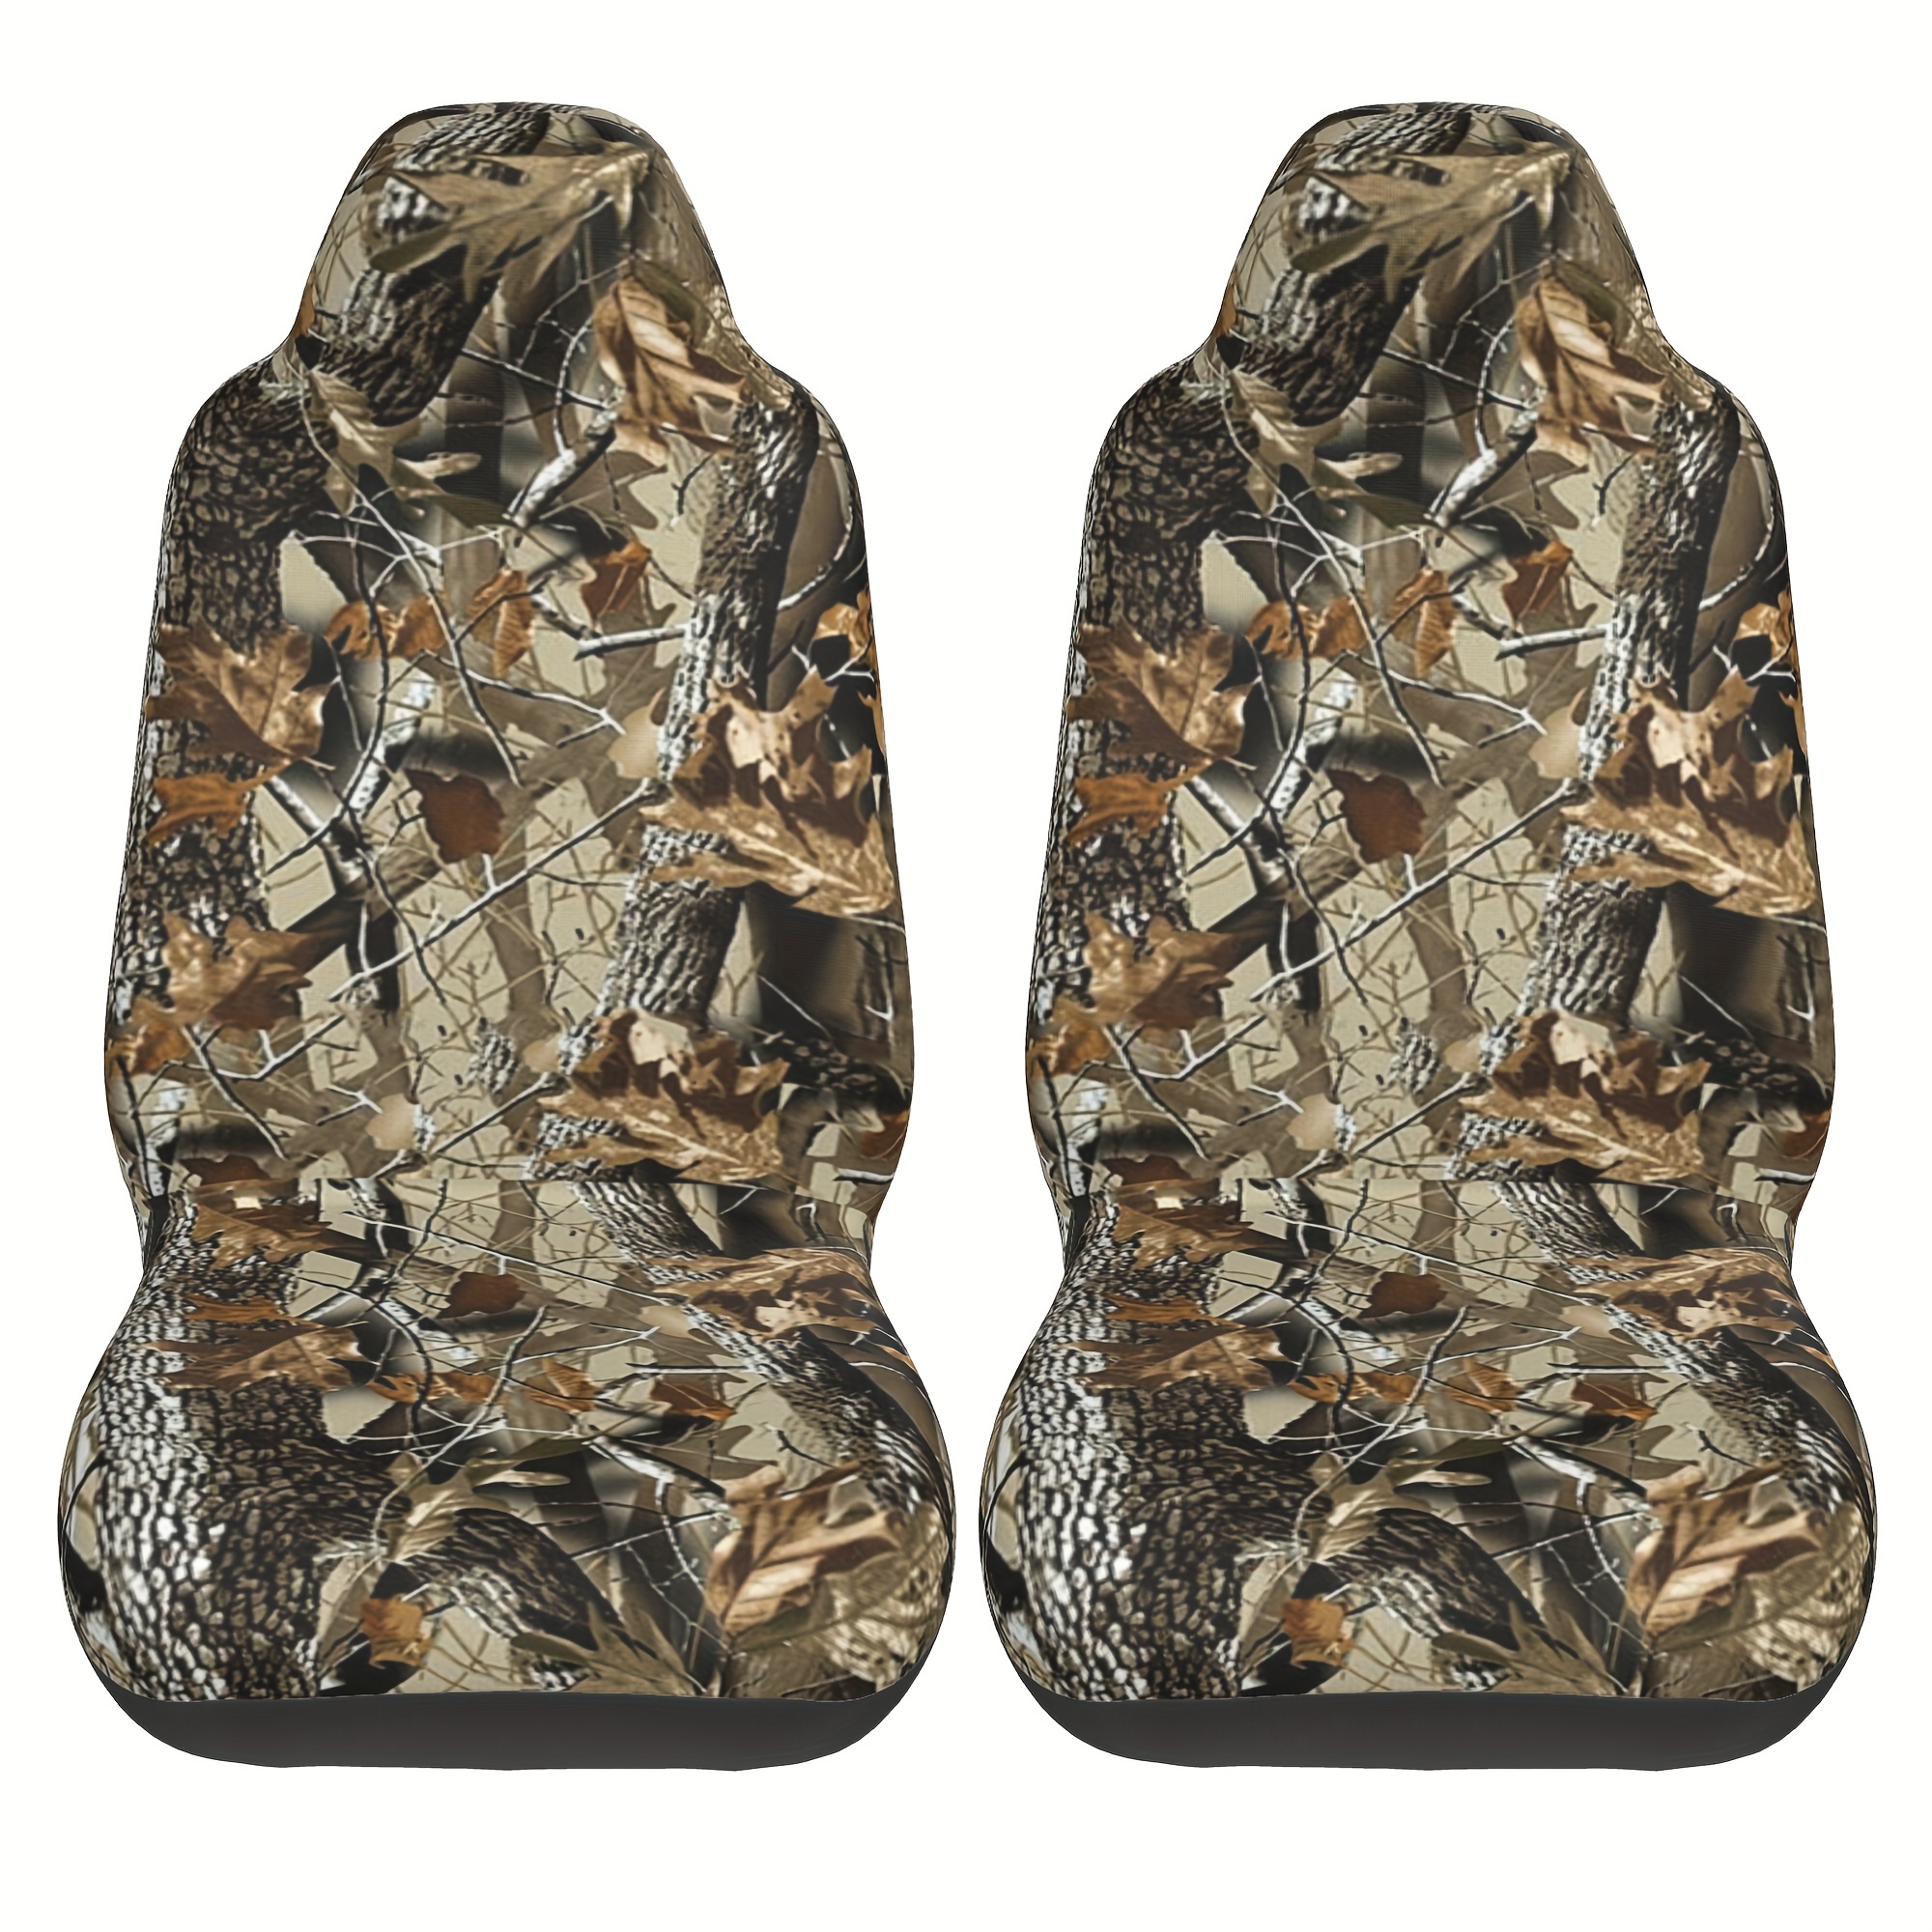 Hunting Camouflage Automotive Car Seat Covers Front Set, Universal Fit High  Back Seat Covers For Cars, Auto, Trucks, SUV, And Van